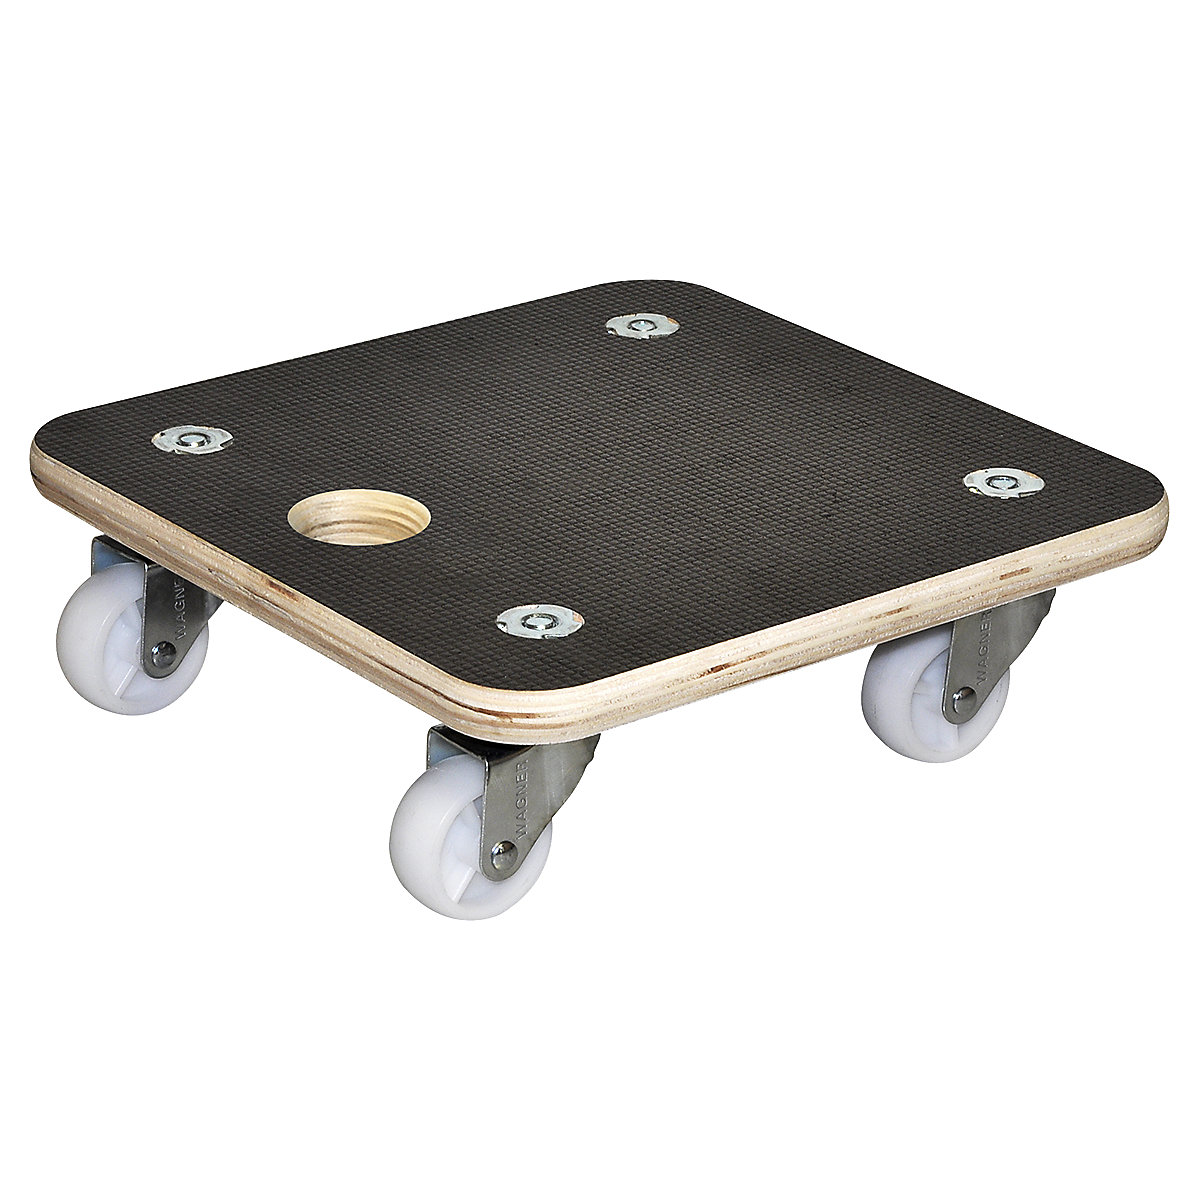 MaxiGRIP GH 1350 universal dolly - Wagner